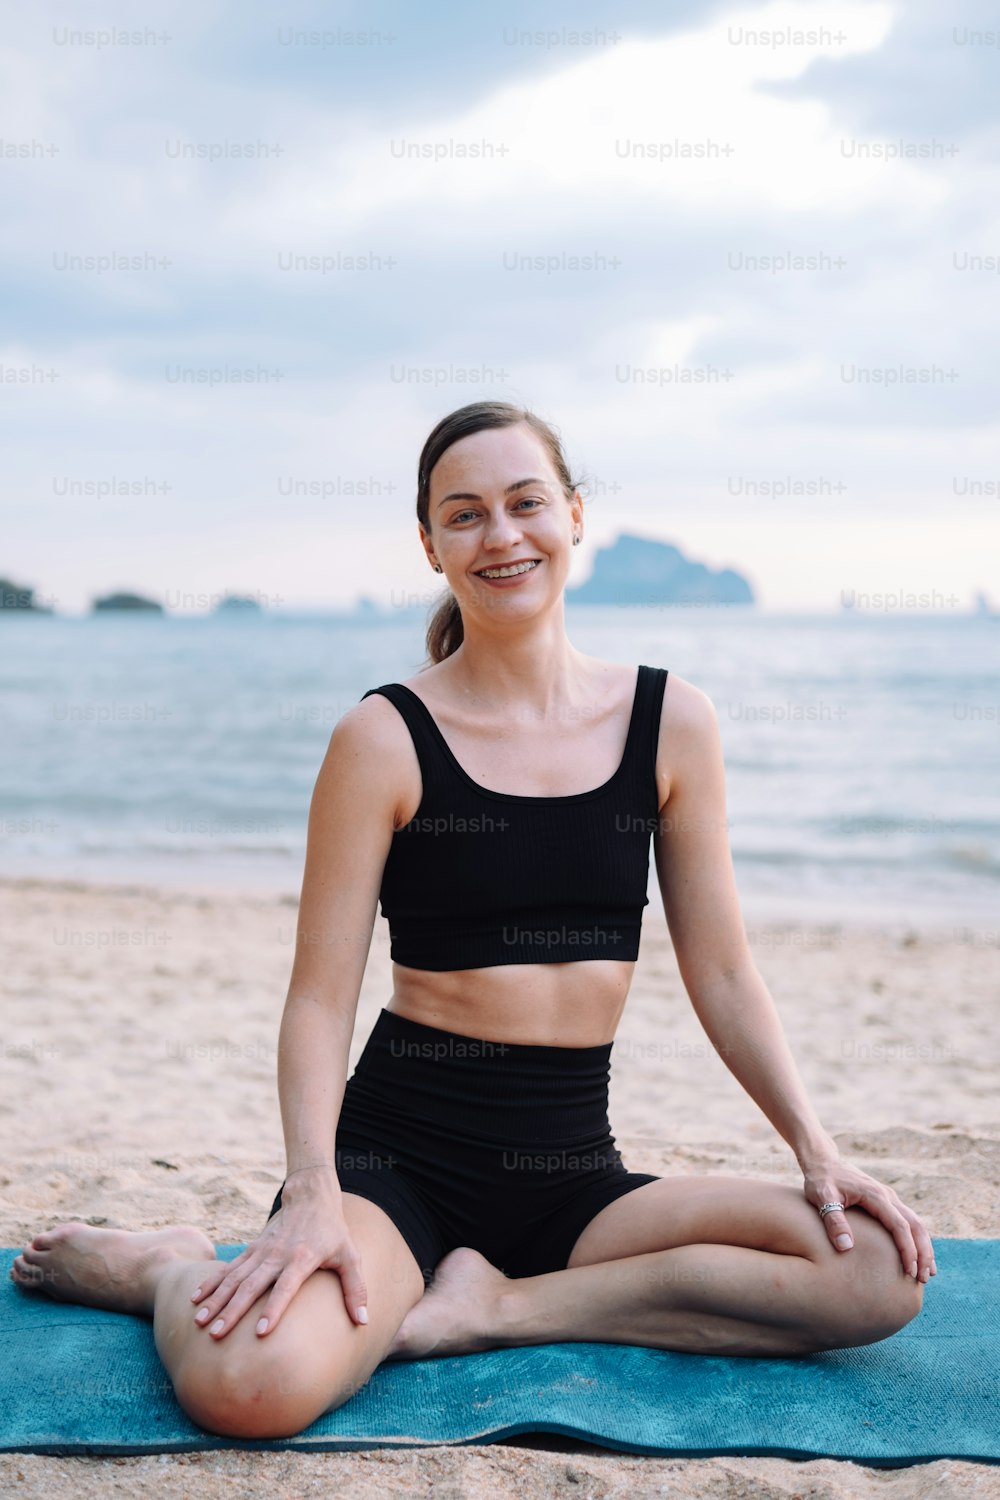 A woman doing a yoga pose on a beach photo – Fitness Image on Unsplash